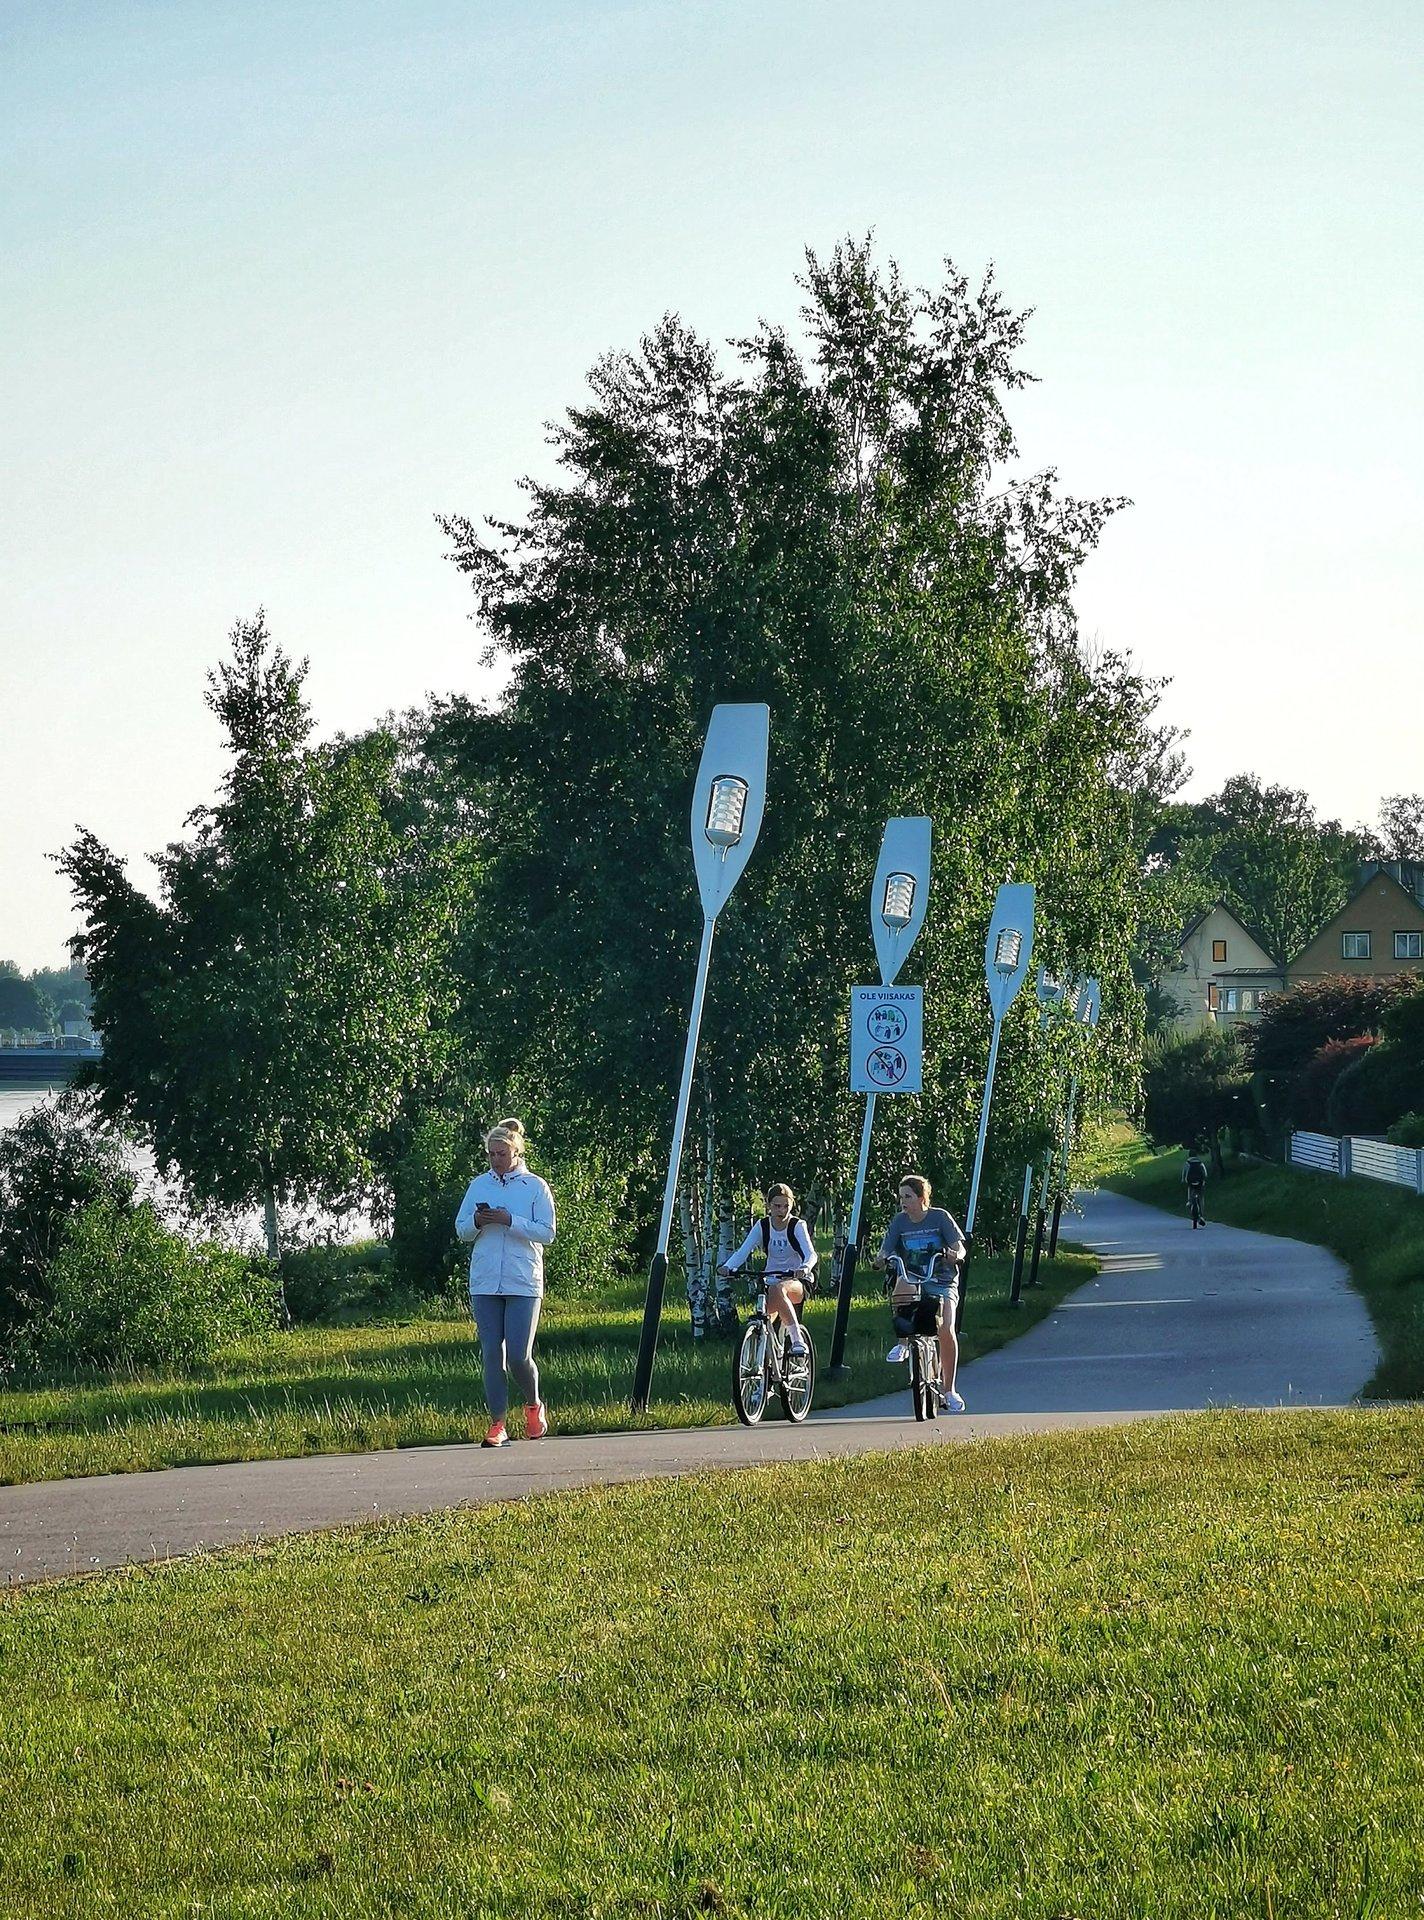 Health track on the right bank of the River Pärnu, or Jaanson's Track